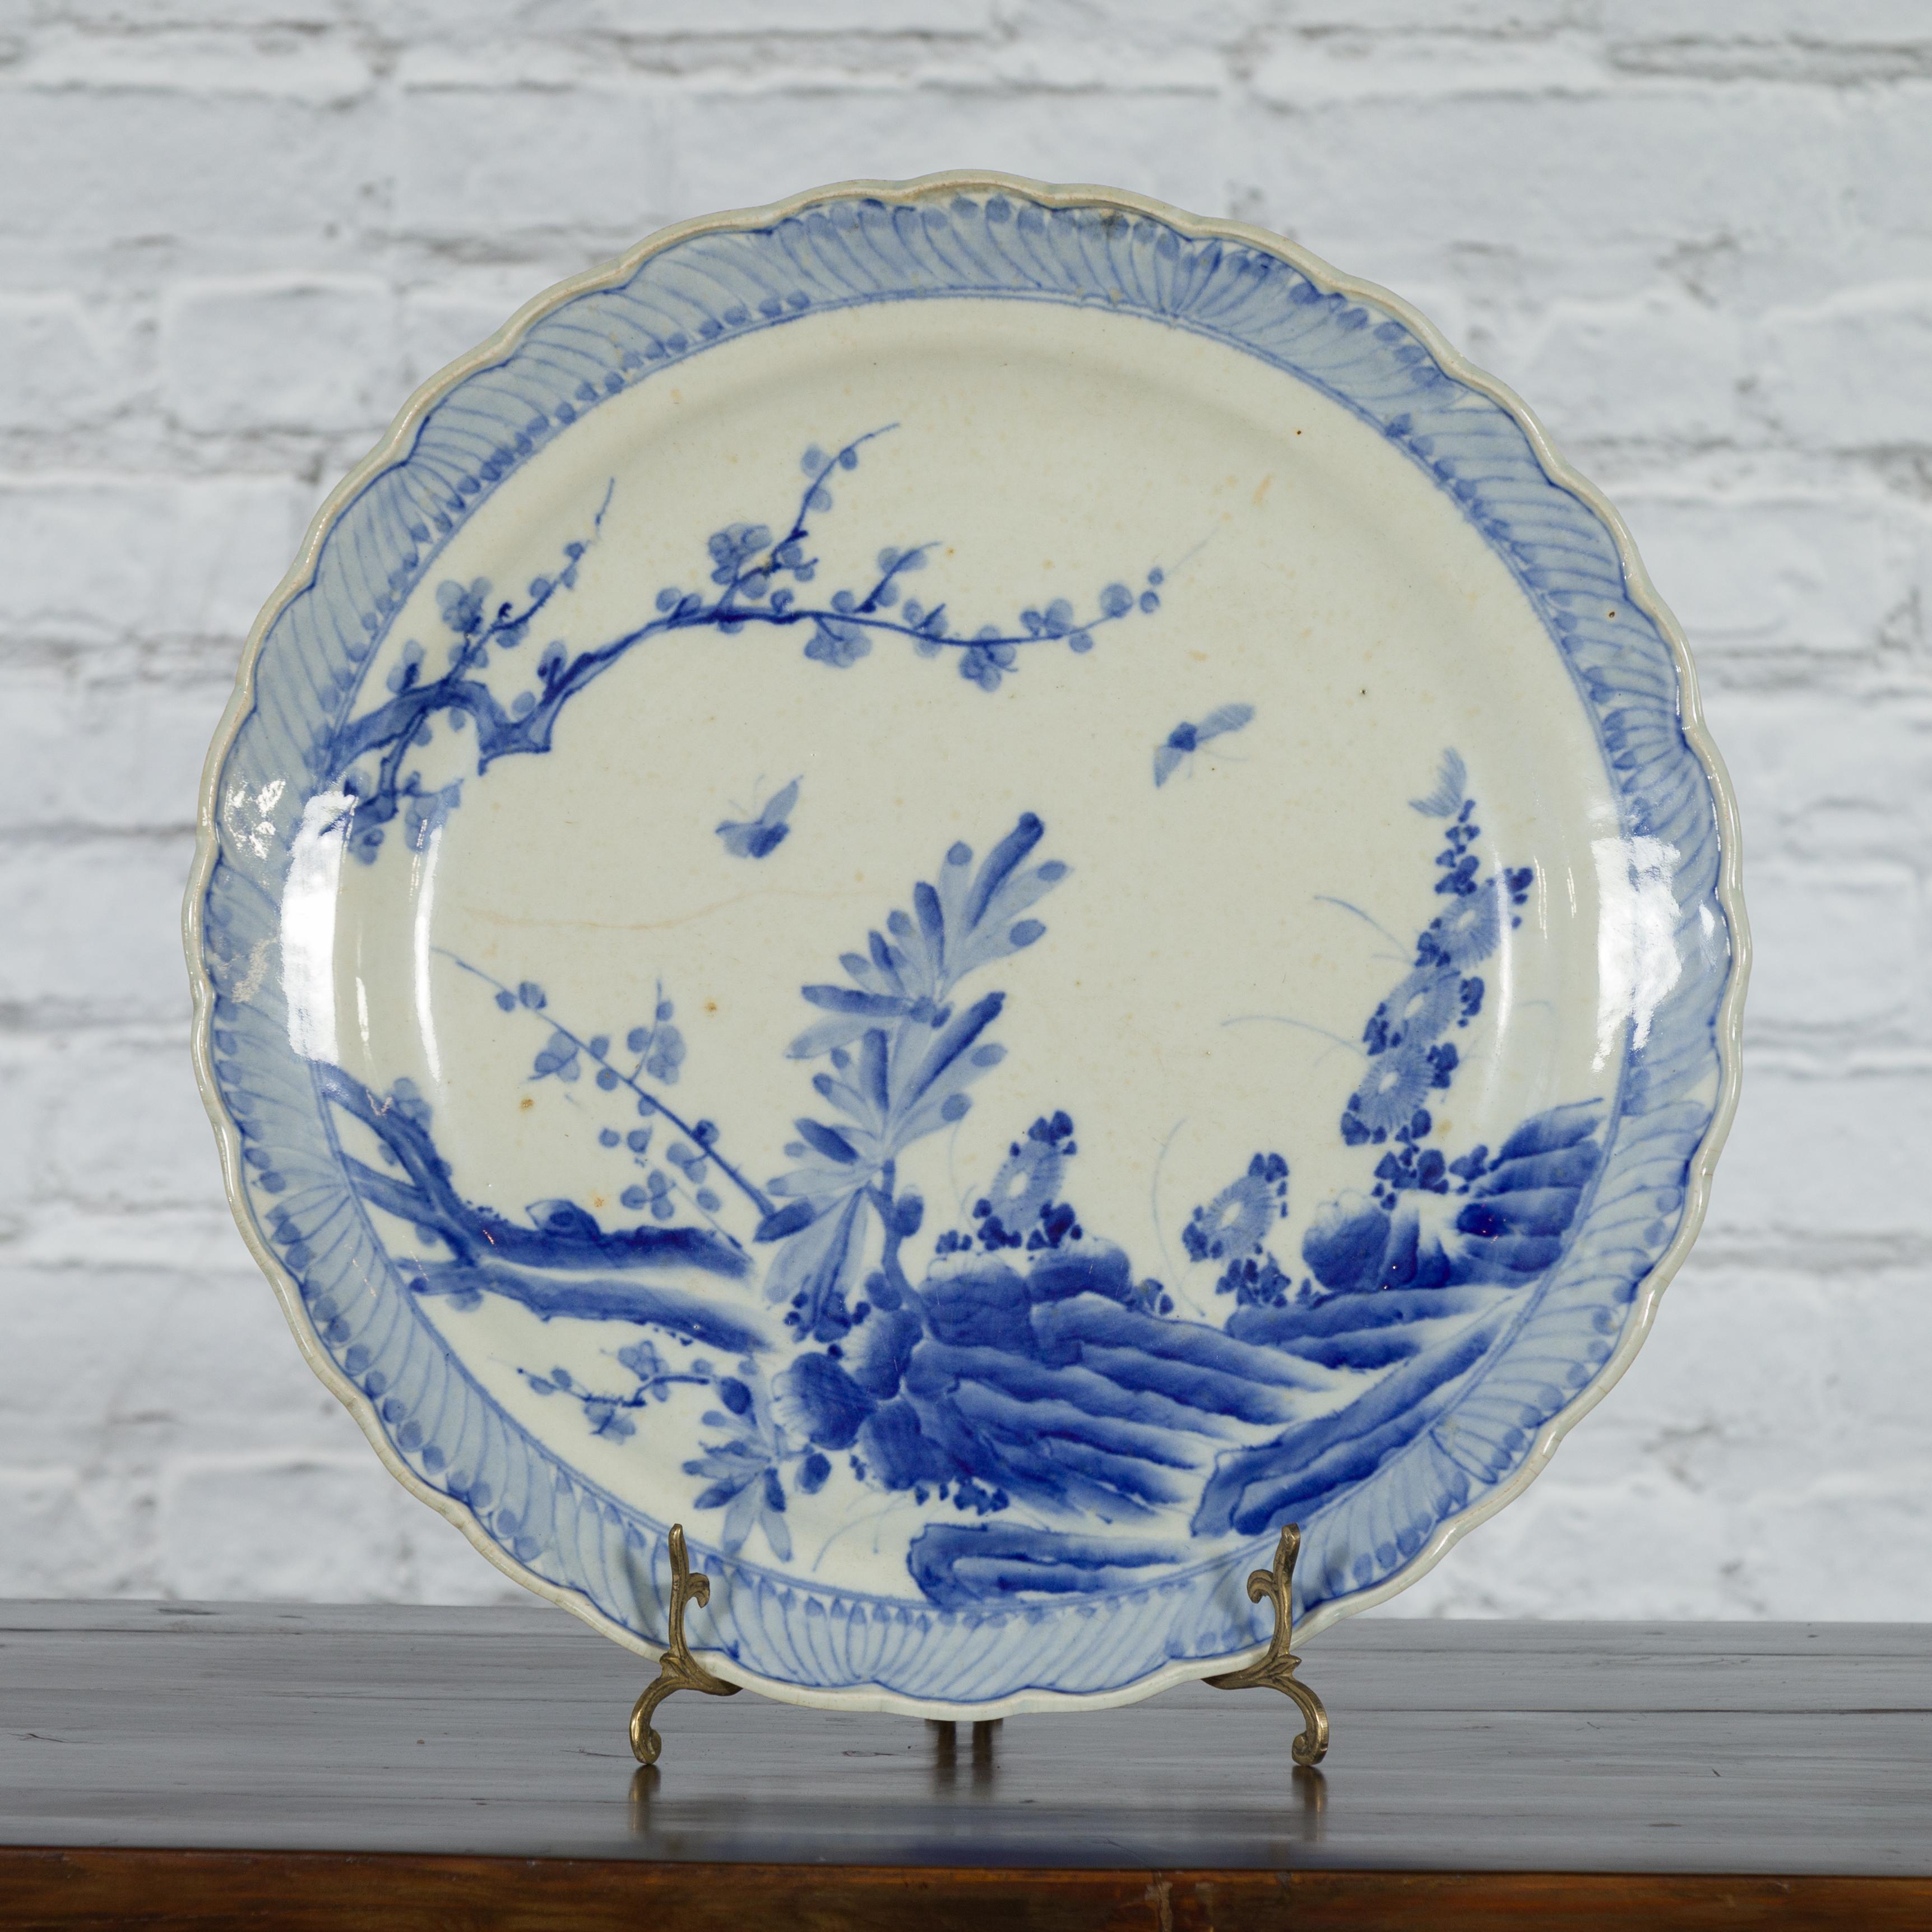 Japanese Blue and White Hand-Painted Porcelain Charger Plate with Foliage Décor In Good Condition For Sale In Yonkers, NY